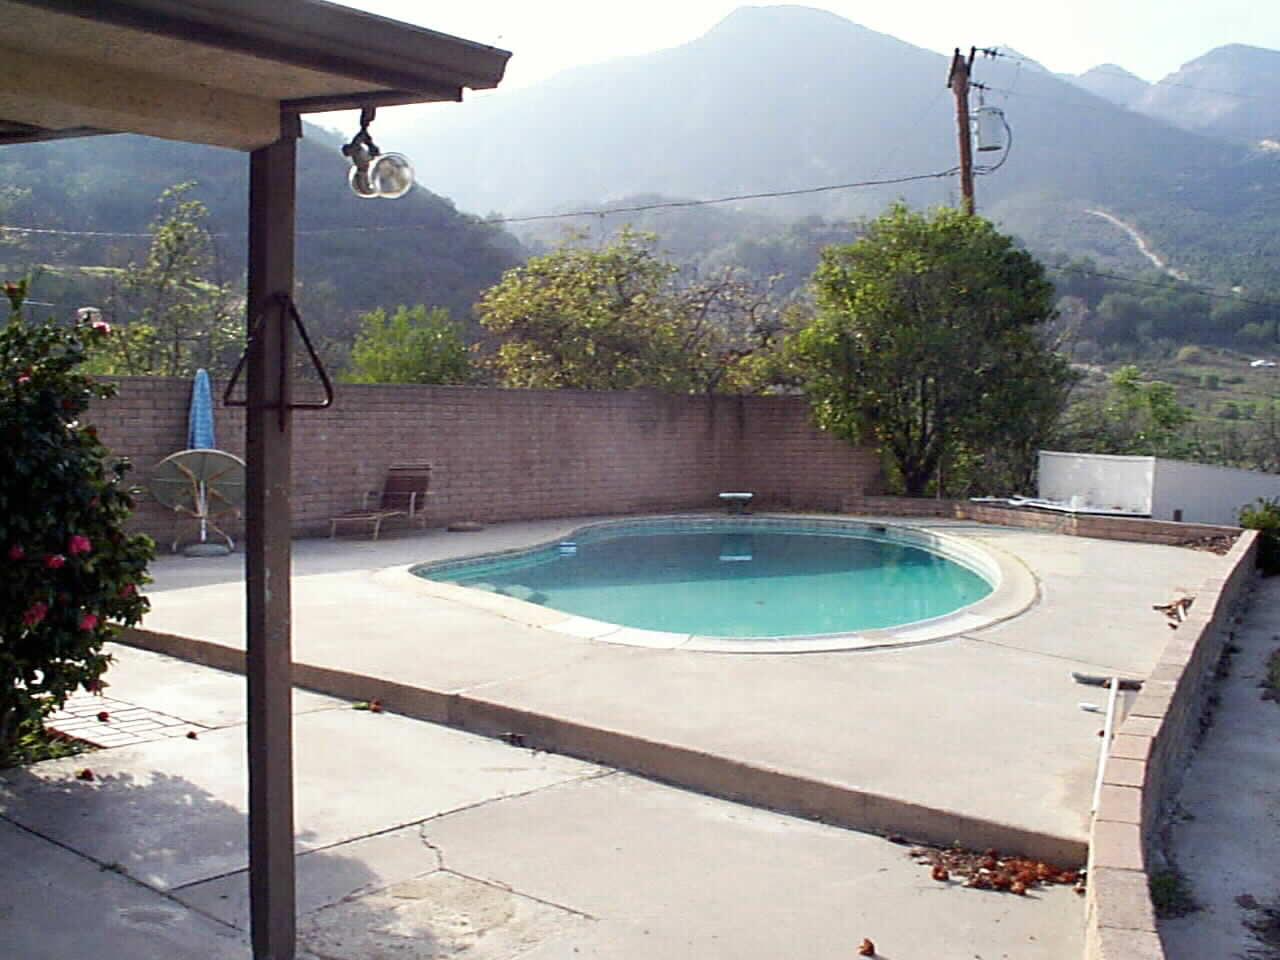 Make all the noise you want around this pool.. the neighbors will never hear it !